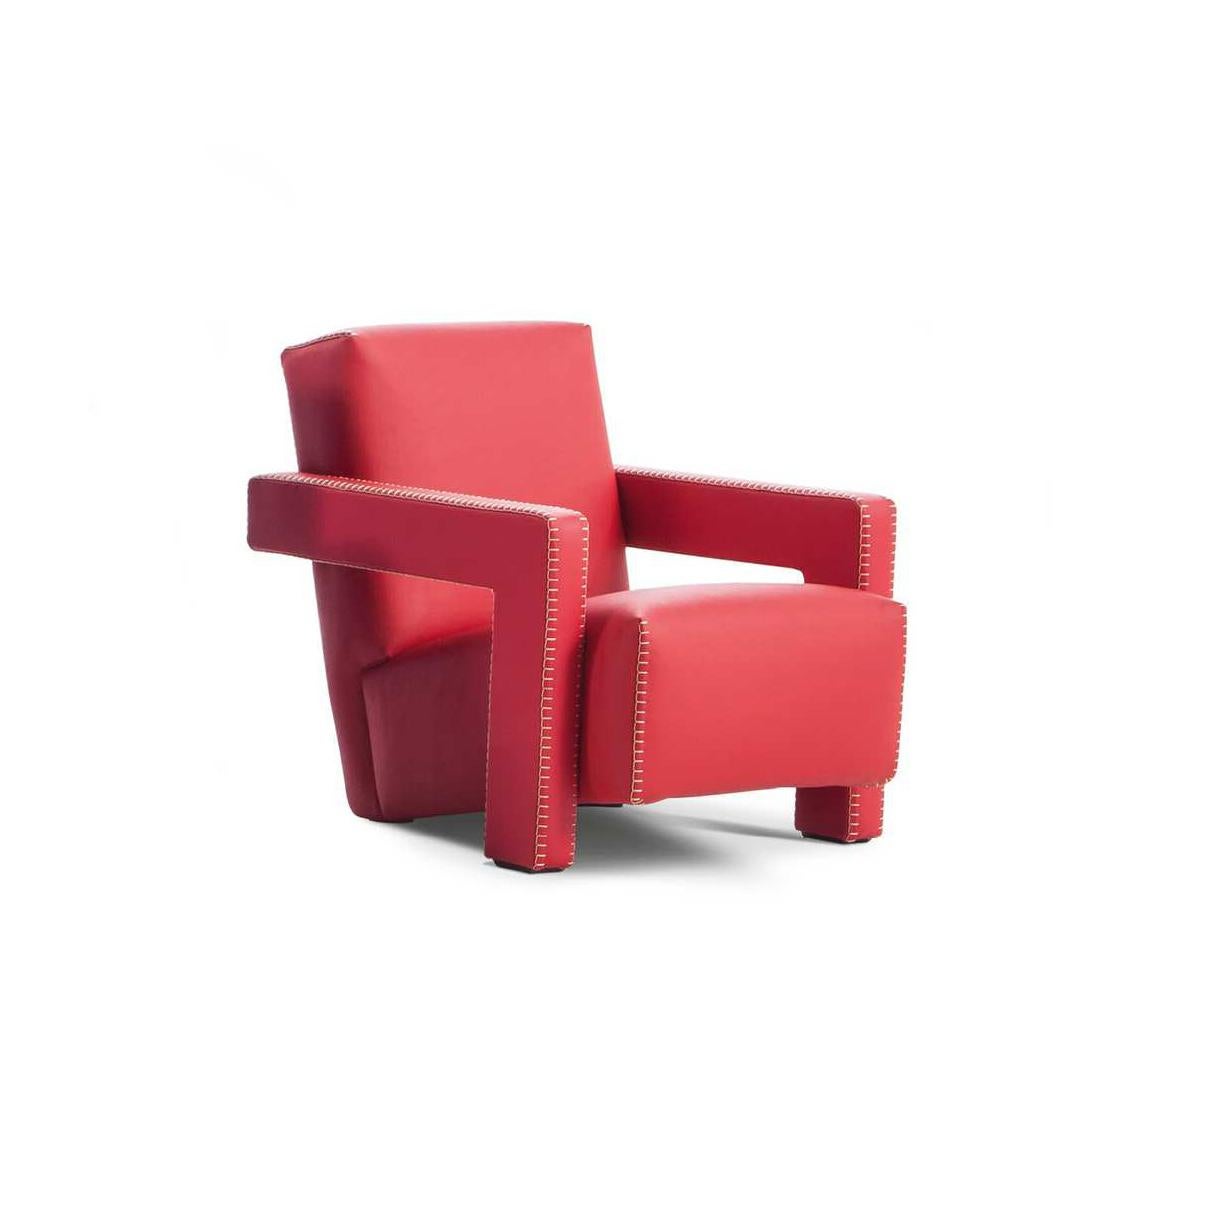 Armchair designed by Gerrit Thomas Rietveld in 1935. Relaunched in 2015.

Baby version.

Manufactured by Cassina in Italy.

Gerrit T. Rietveld came up with the design for the Utrecht armchair in 1935 while working for the Metz & Co. department store